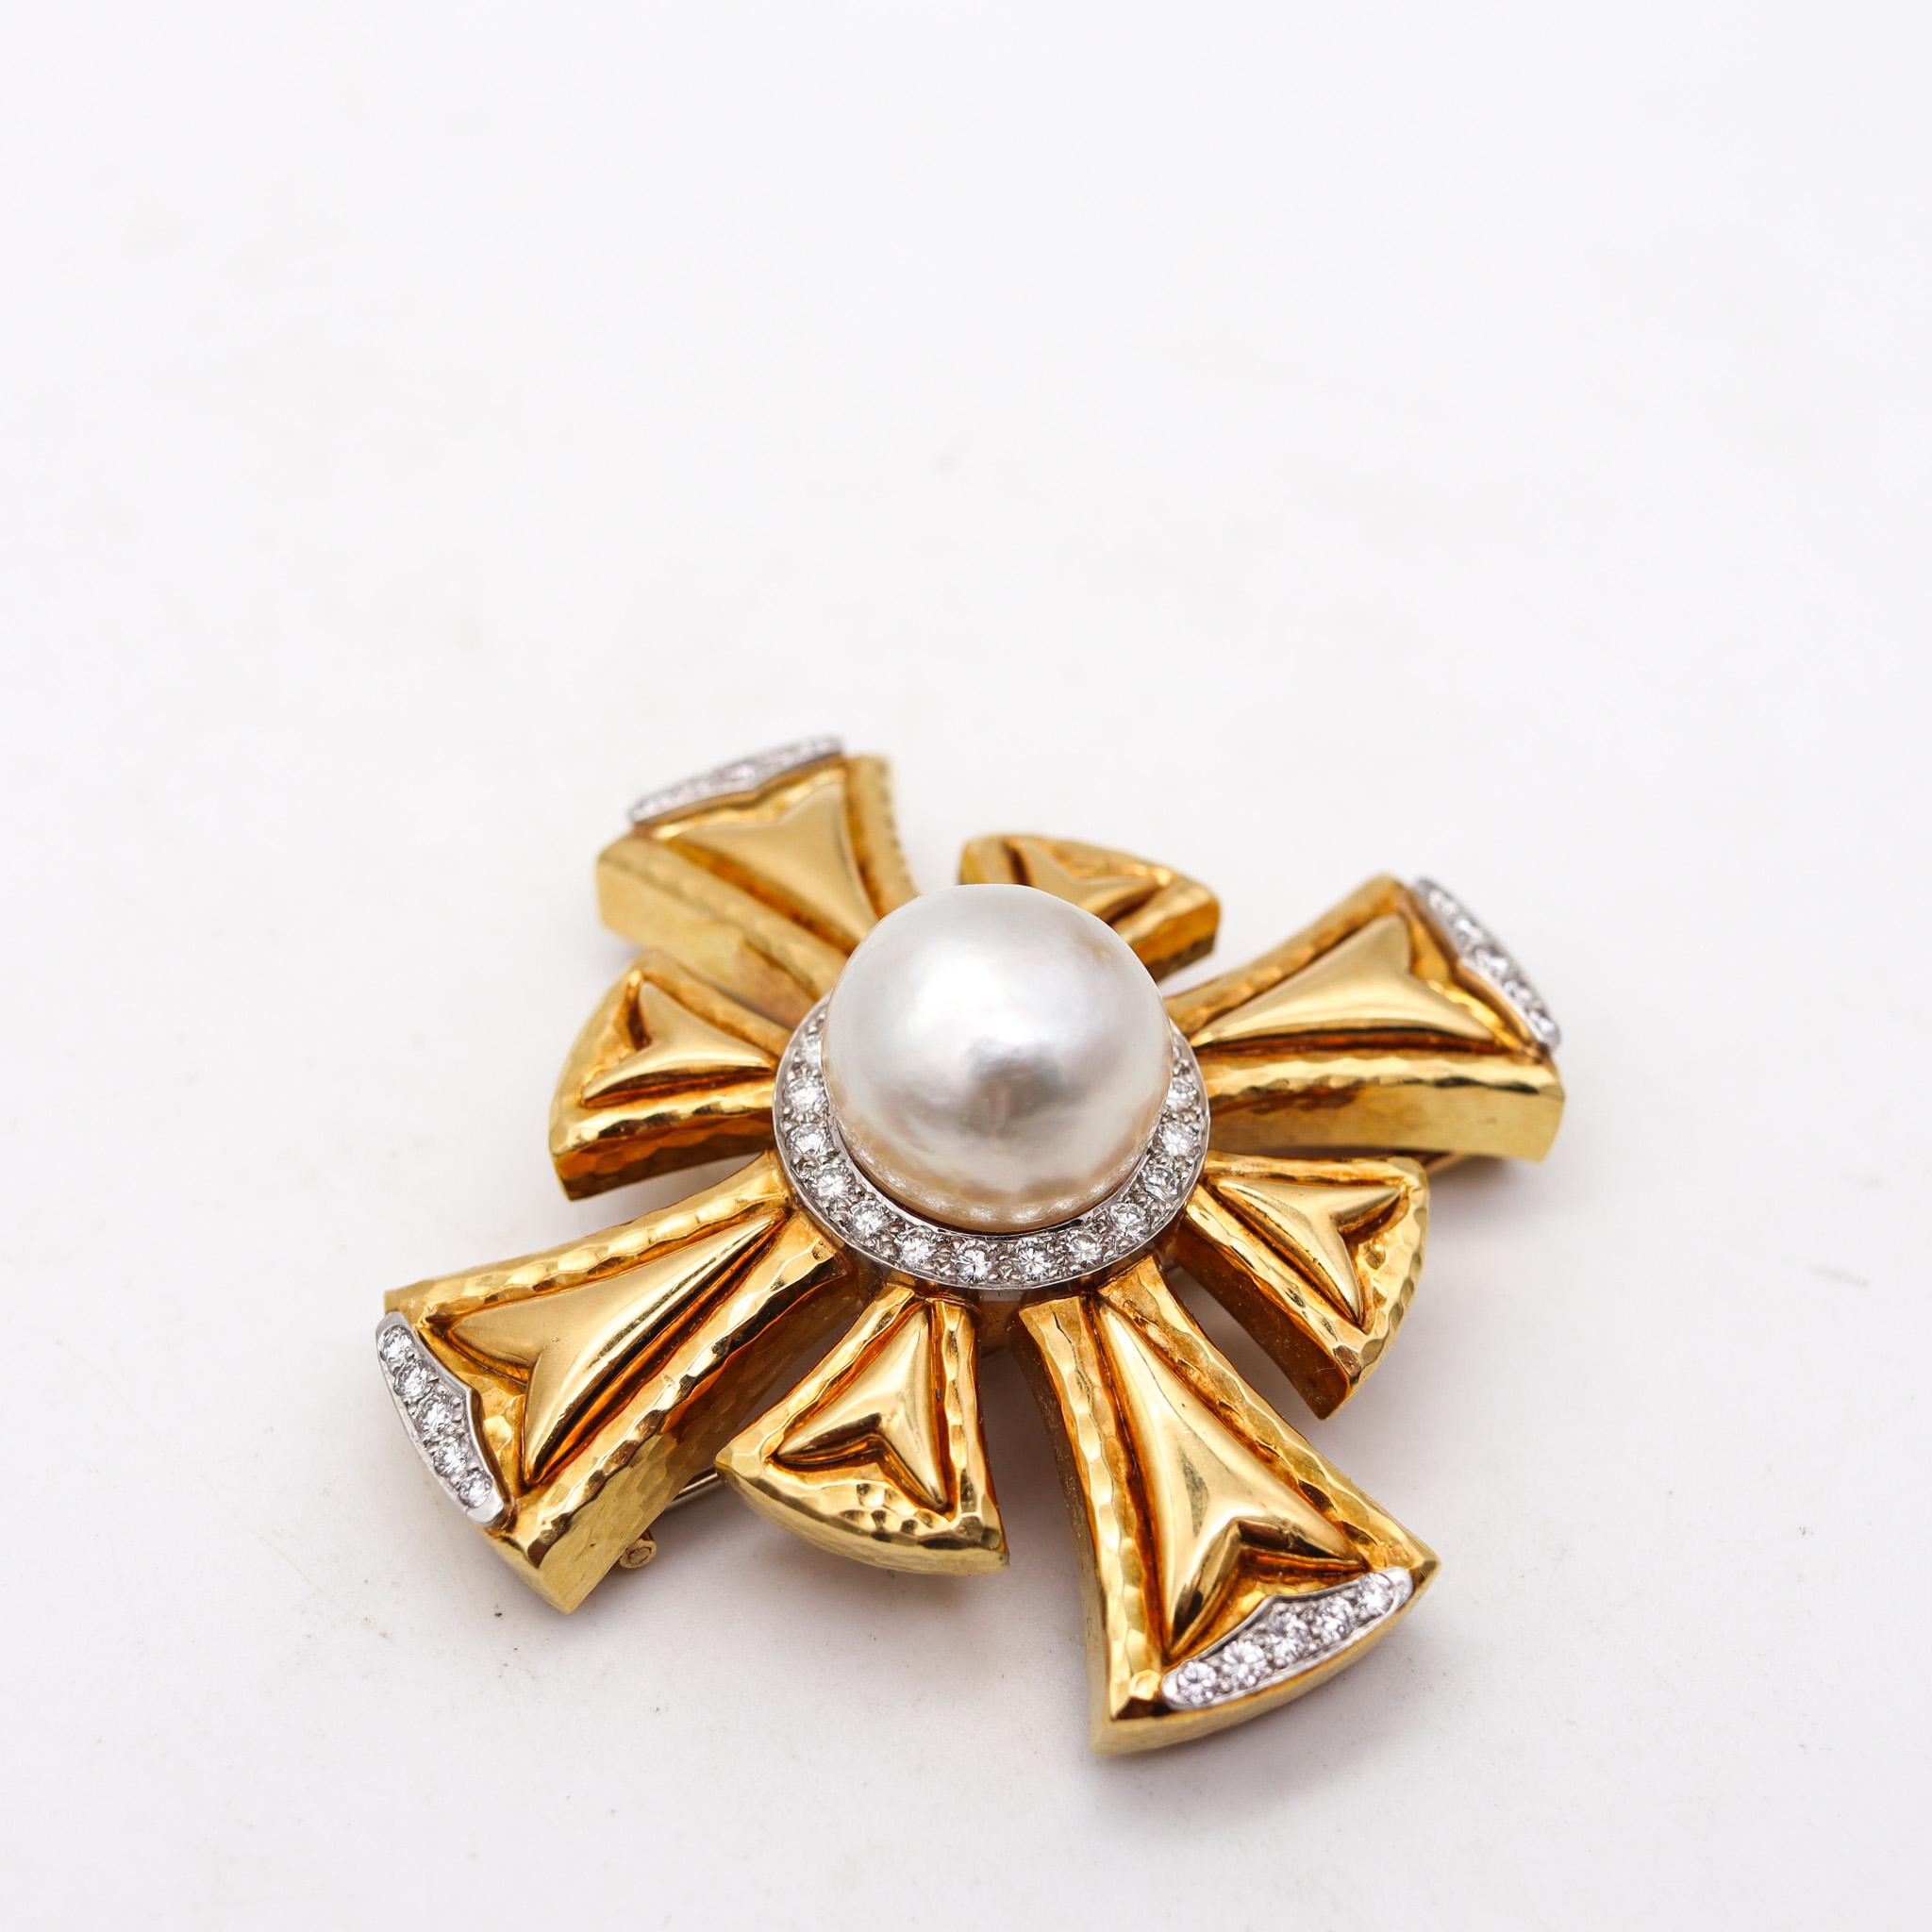 Pendant brooch designed by Andrew Clunn.

Gorgeous convertible pendant-brooch, created in New York city at the jewelry atelier of Andrew Clunn. This piece has been crafted in the shape of a Maltese cross with hammered patterns in solid rich yellow